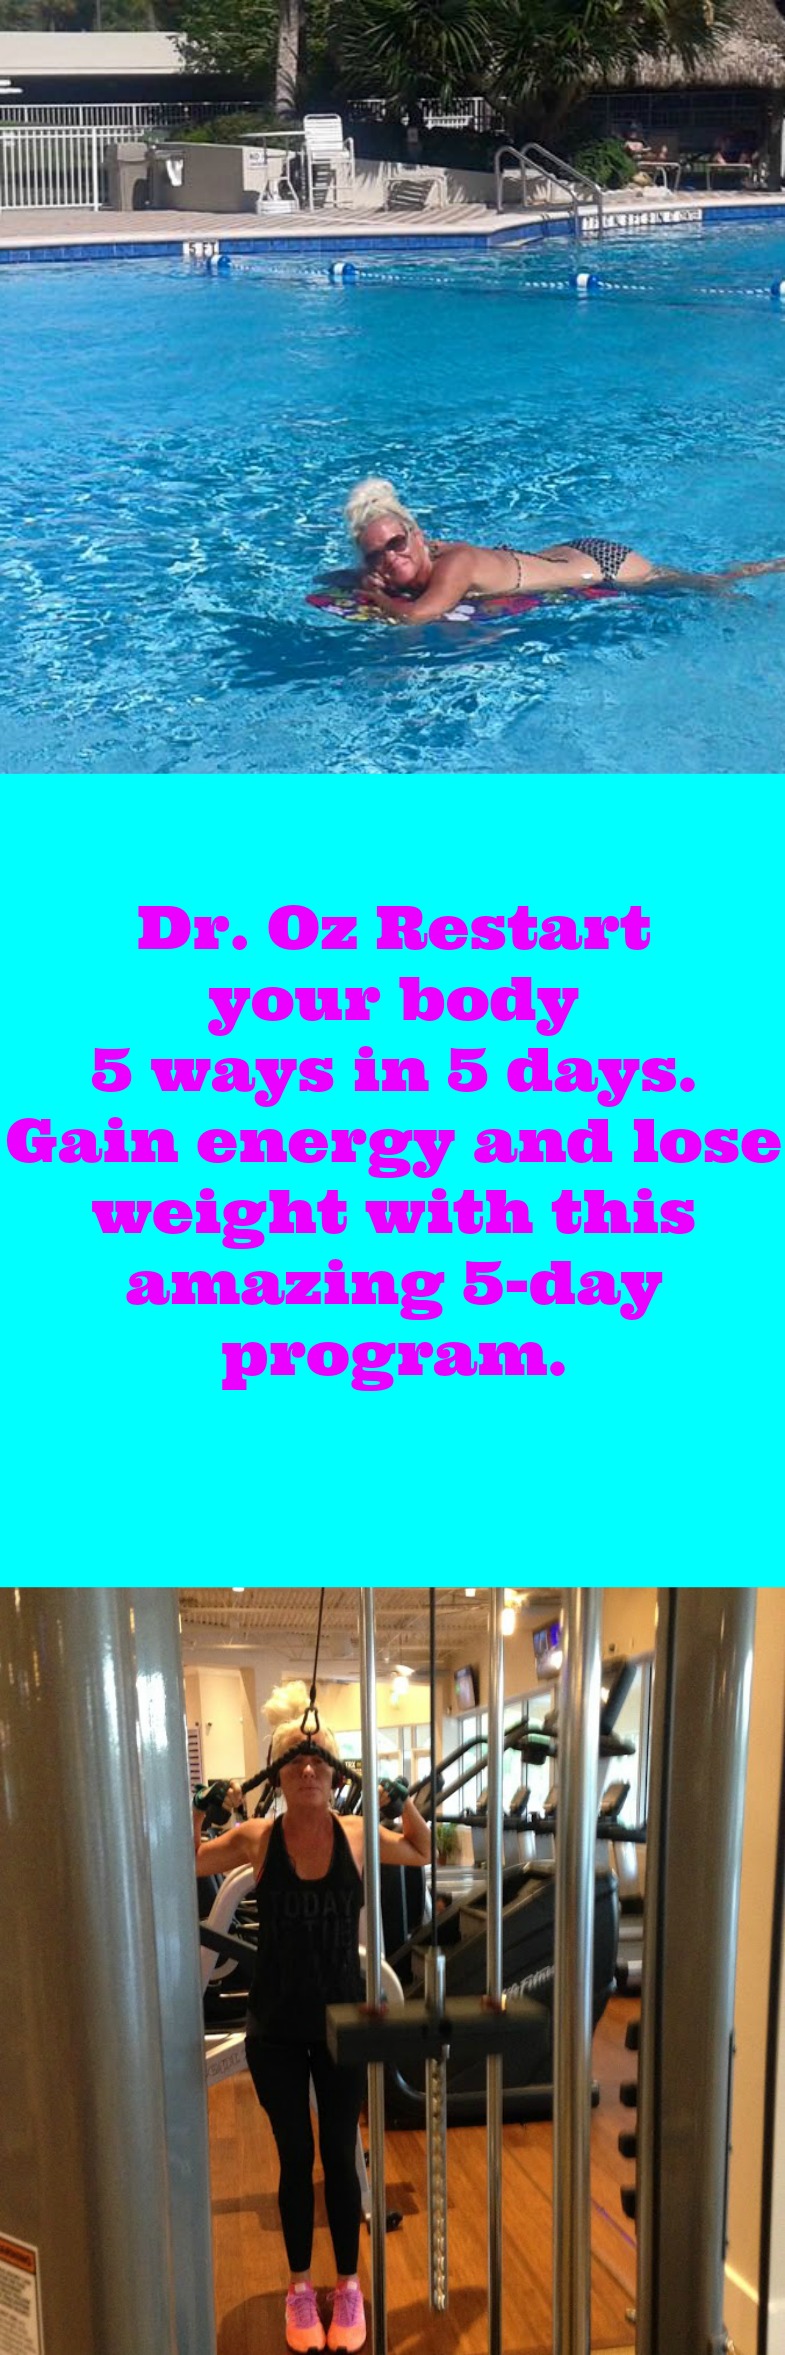 You'll want to Jumpstart your healthy goals this year with Dr. Oz Restart your body 5 ways in 5 days. Gain energy and lose weight with this amazing 5-day program. You will see rapid weight loss, lose belly fat with this healthy lifestyle recipe for weightloss.